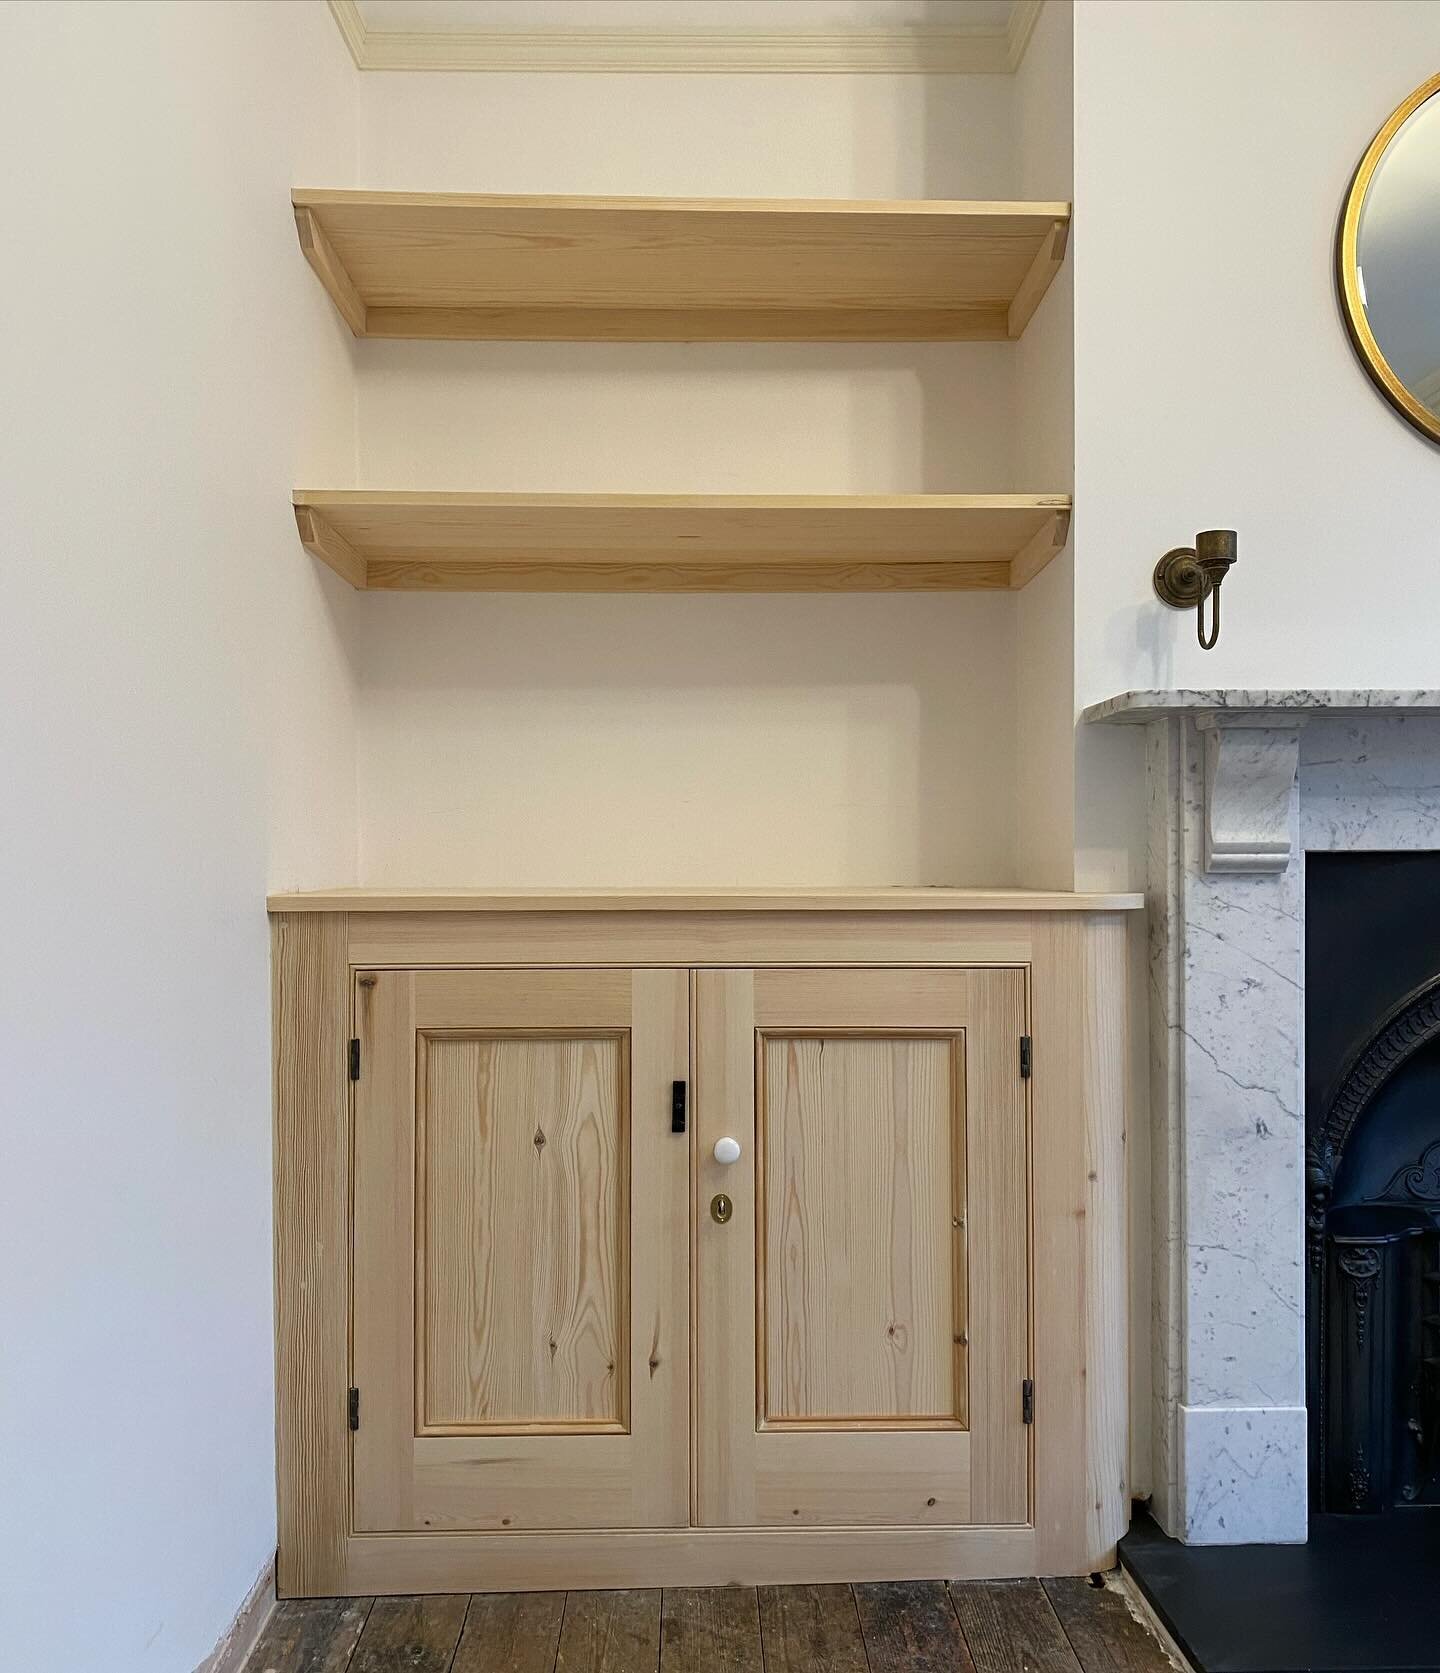 De Beauvoir low cupboards with battened shelves. Awaiting paint. Crystal Palace. London. 
The original maker.
&bull;
&bull;
&bull;
#cupboard #livingroom #alcove #theoriginalmaker #home #interiordesign #alcovecupboards #joinery #cupboards #shelving #s